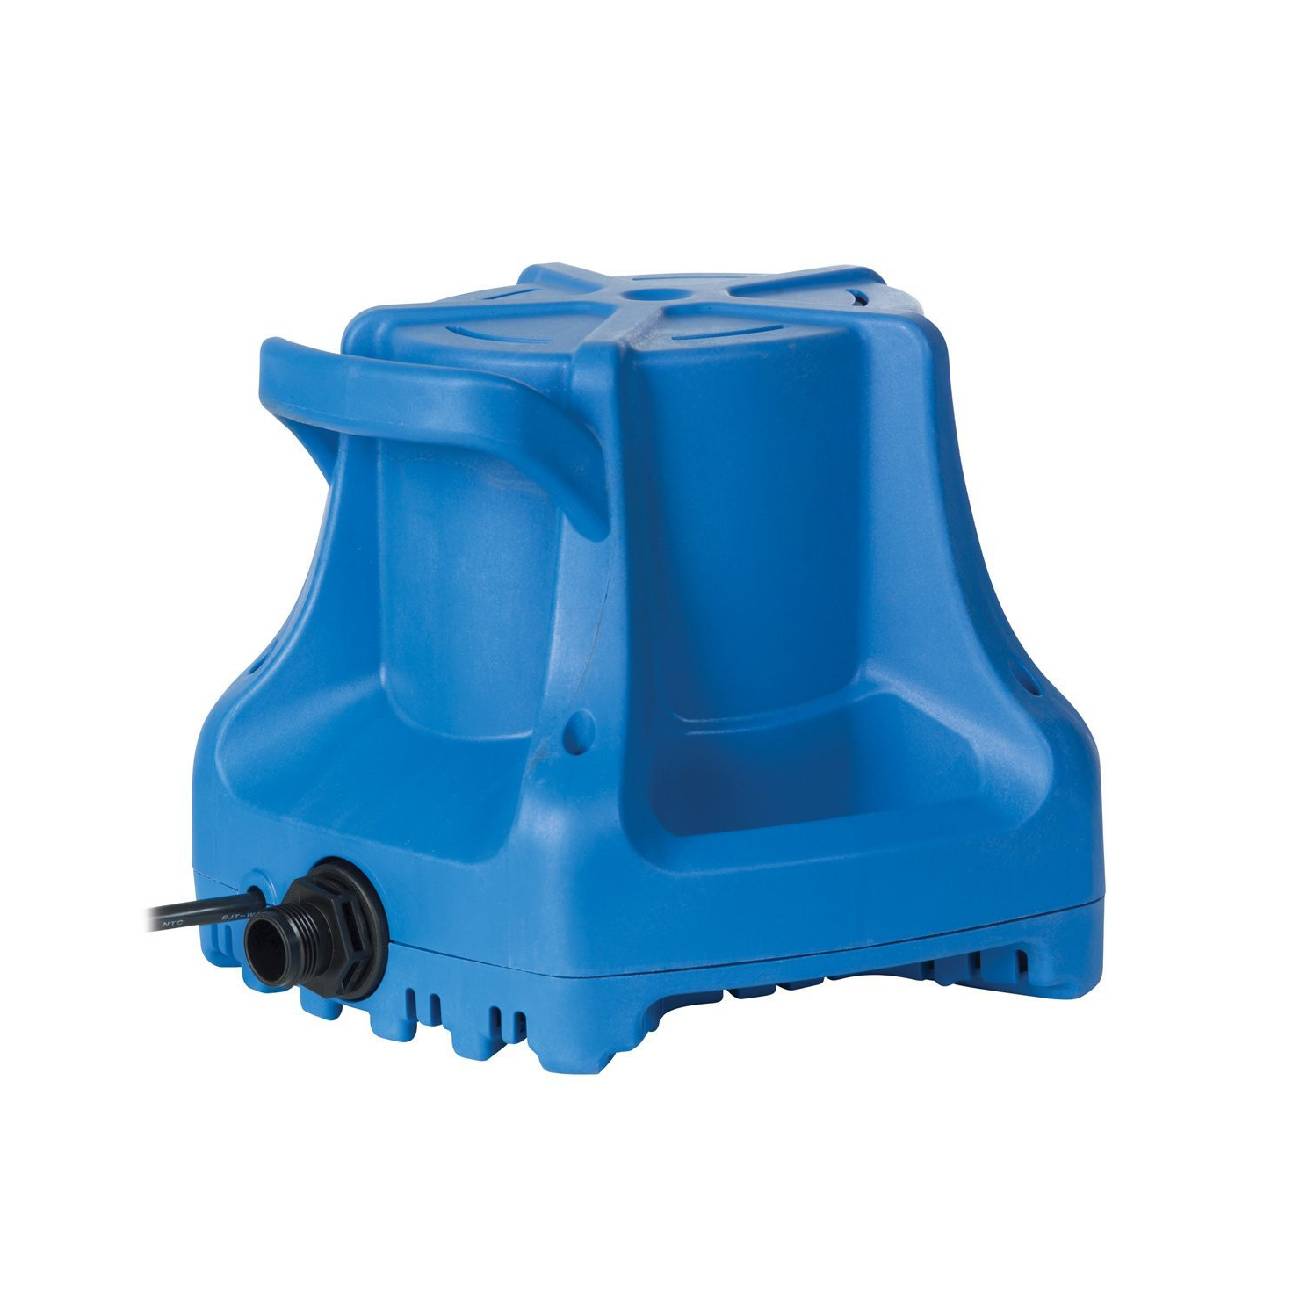 AUTOMATIC COVER PUMP – LITTLE GIANT